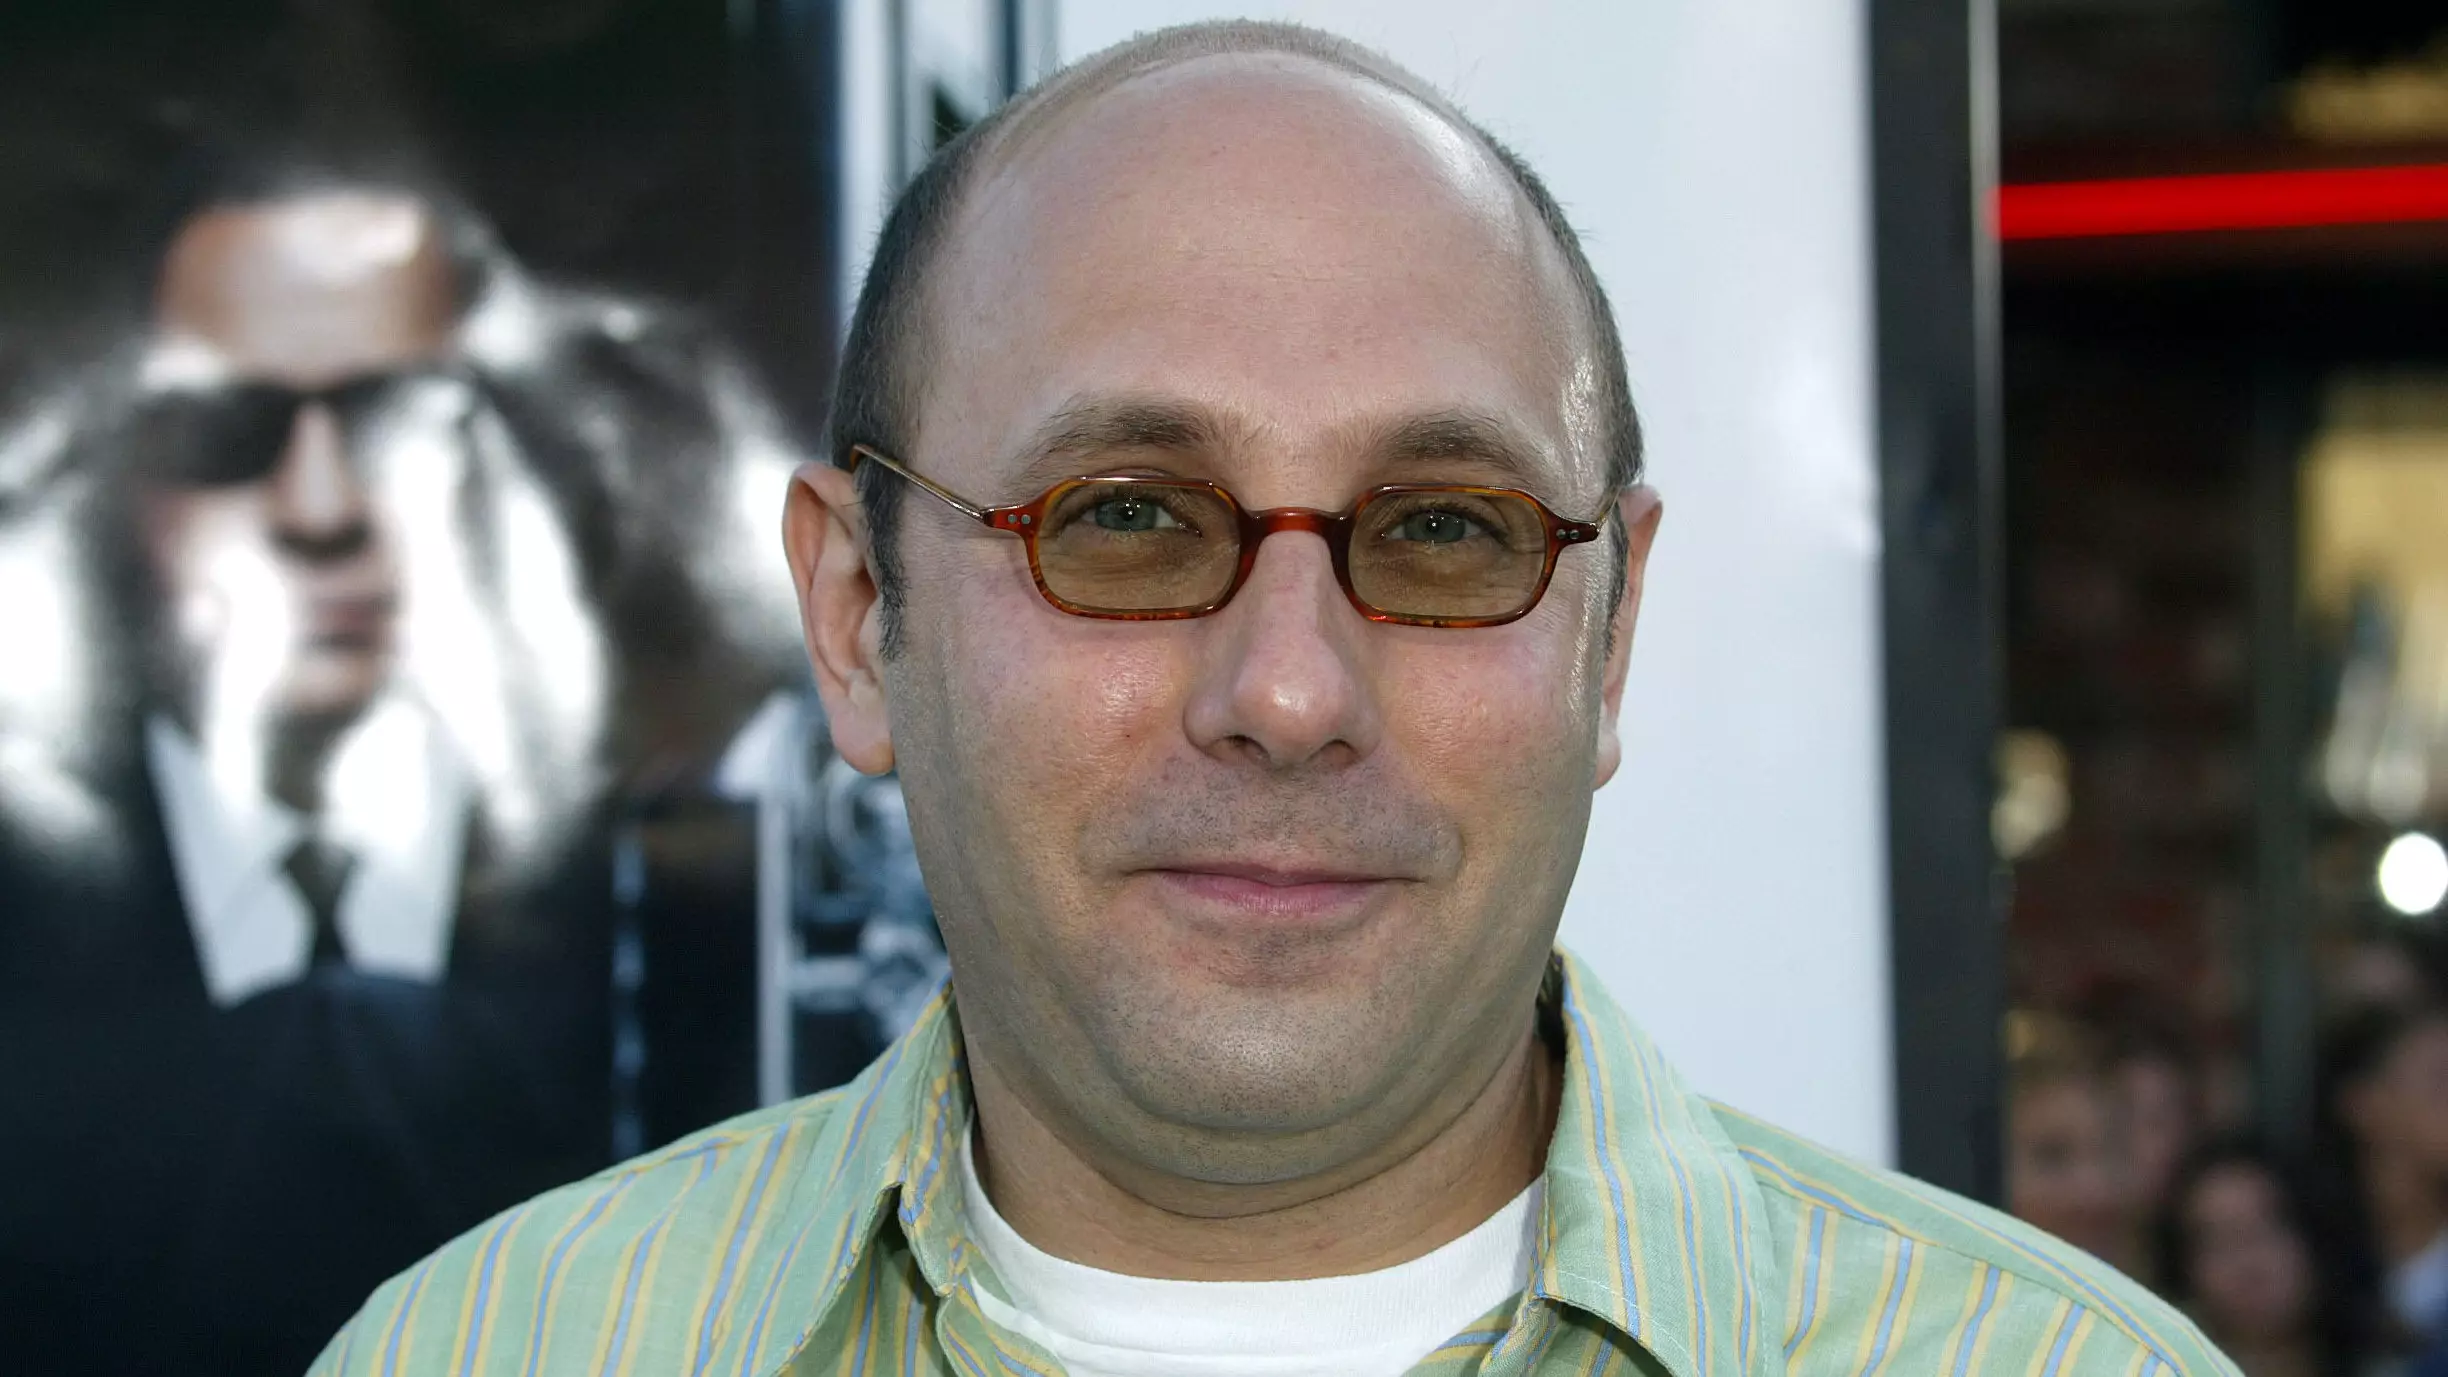 Sex And The City Star Willie Garson Has Died, Aged 57